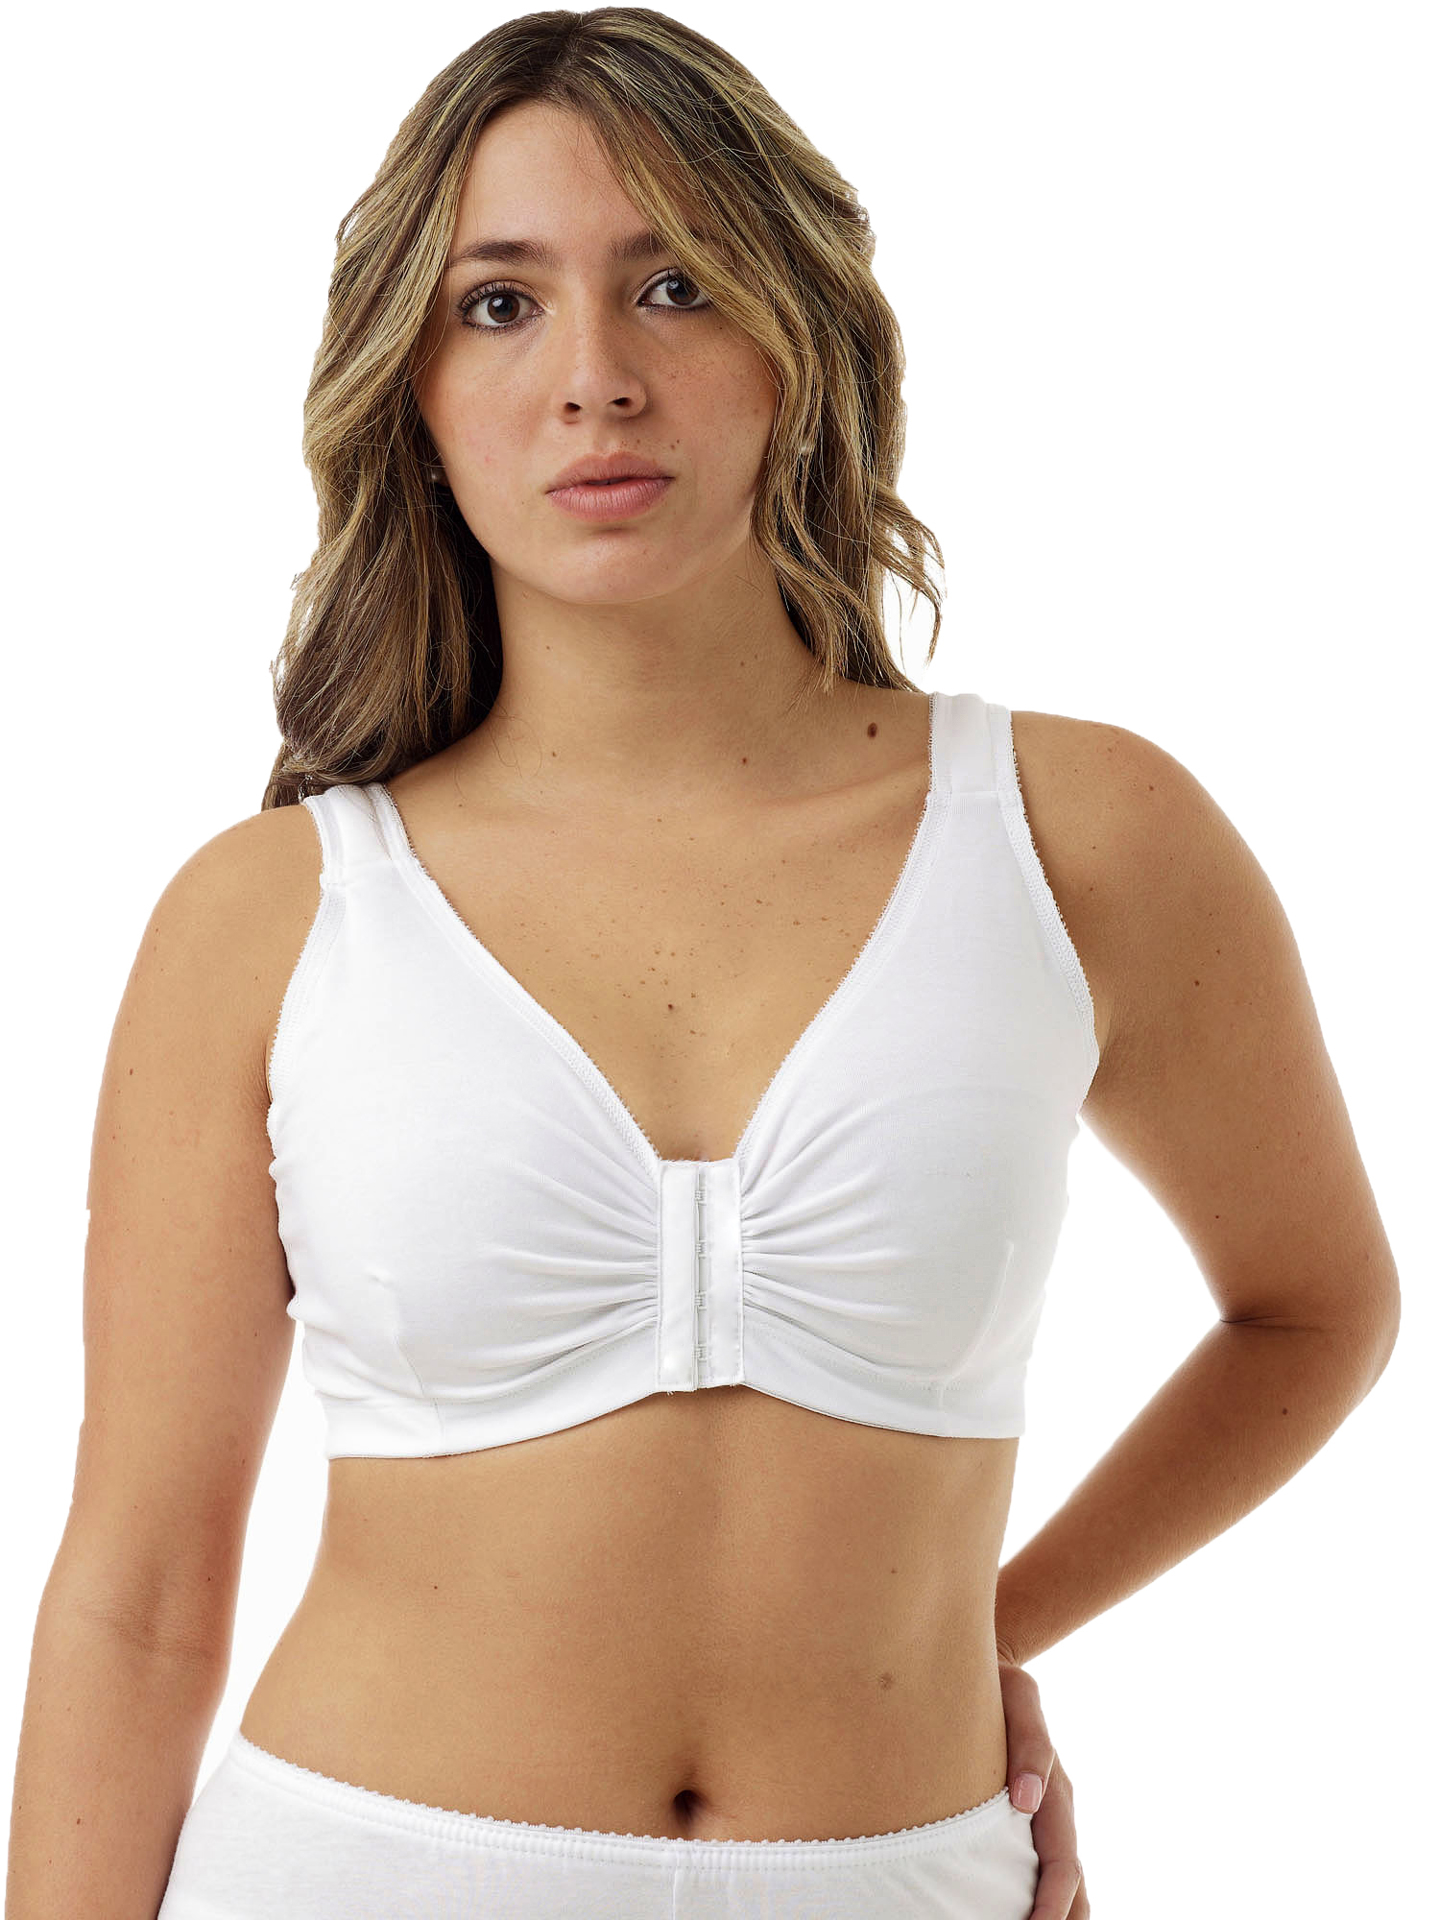 Underworks Mastitis Therapy Bra with Pockets - Hot Compress Pads Included -  Adjustable - Postpartum Breast Engorgement Relief - White 